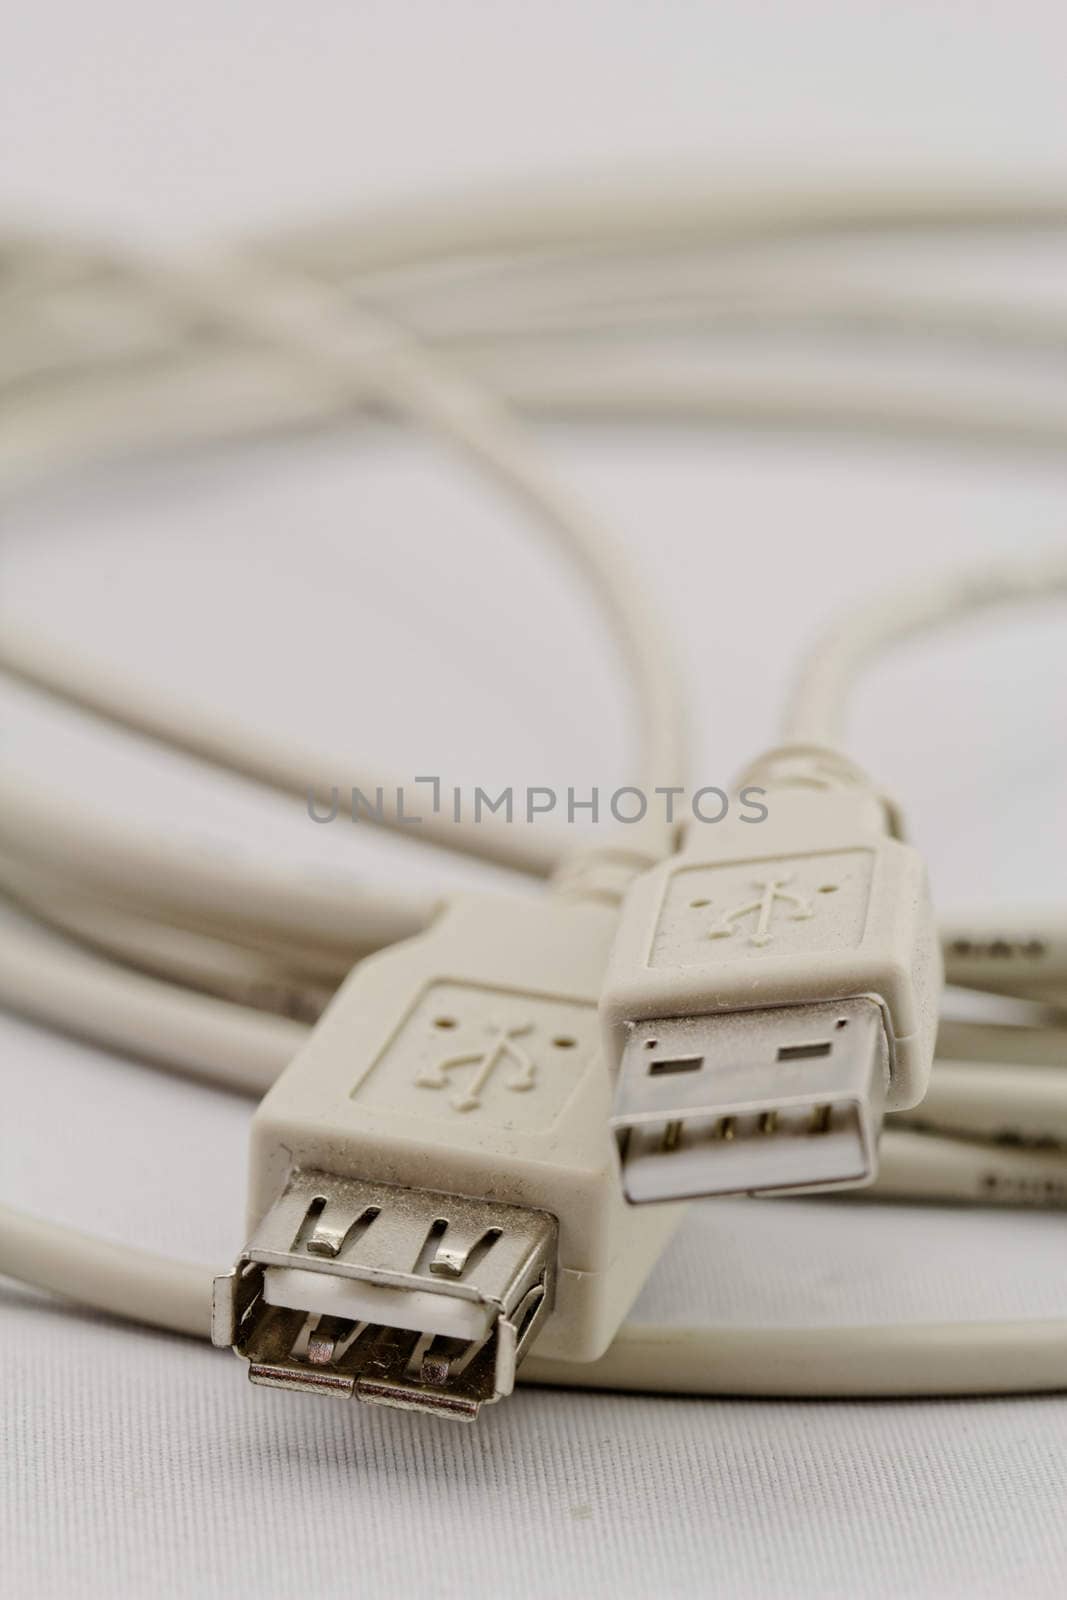 usb extension cable by NagyDodo